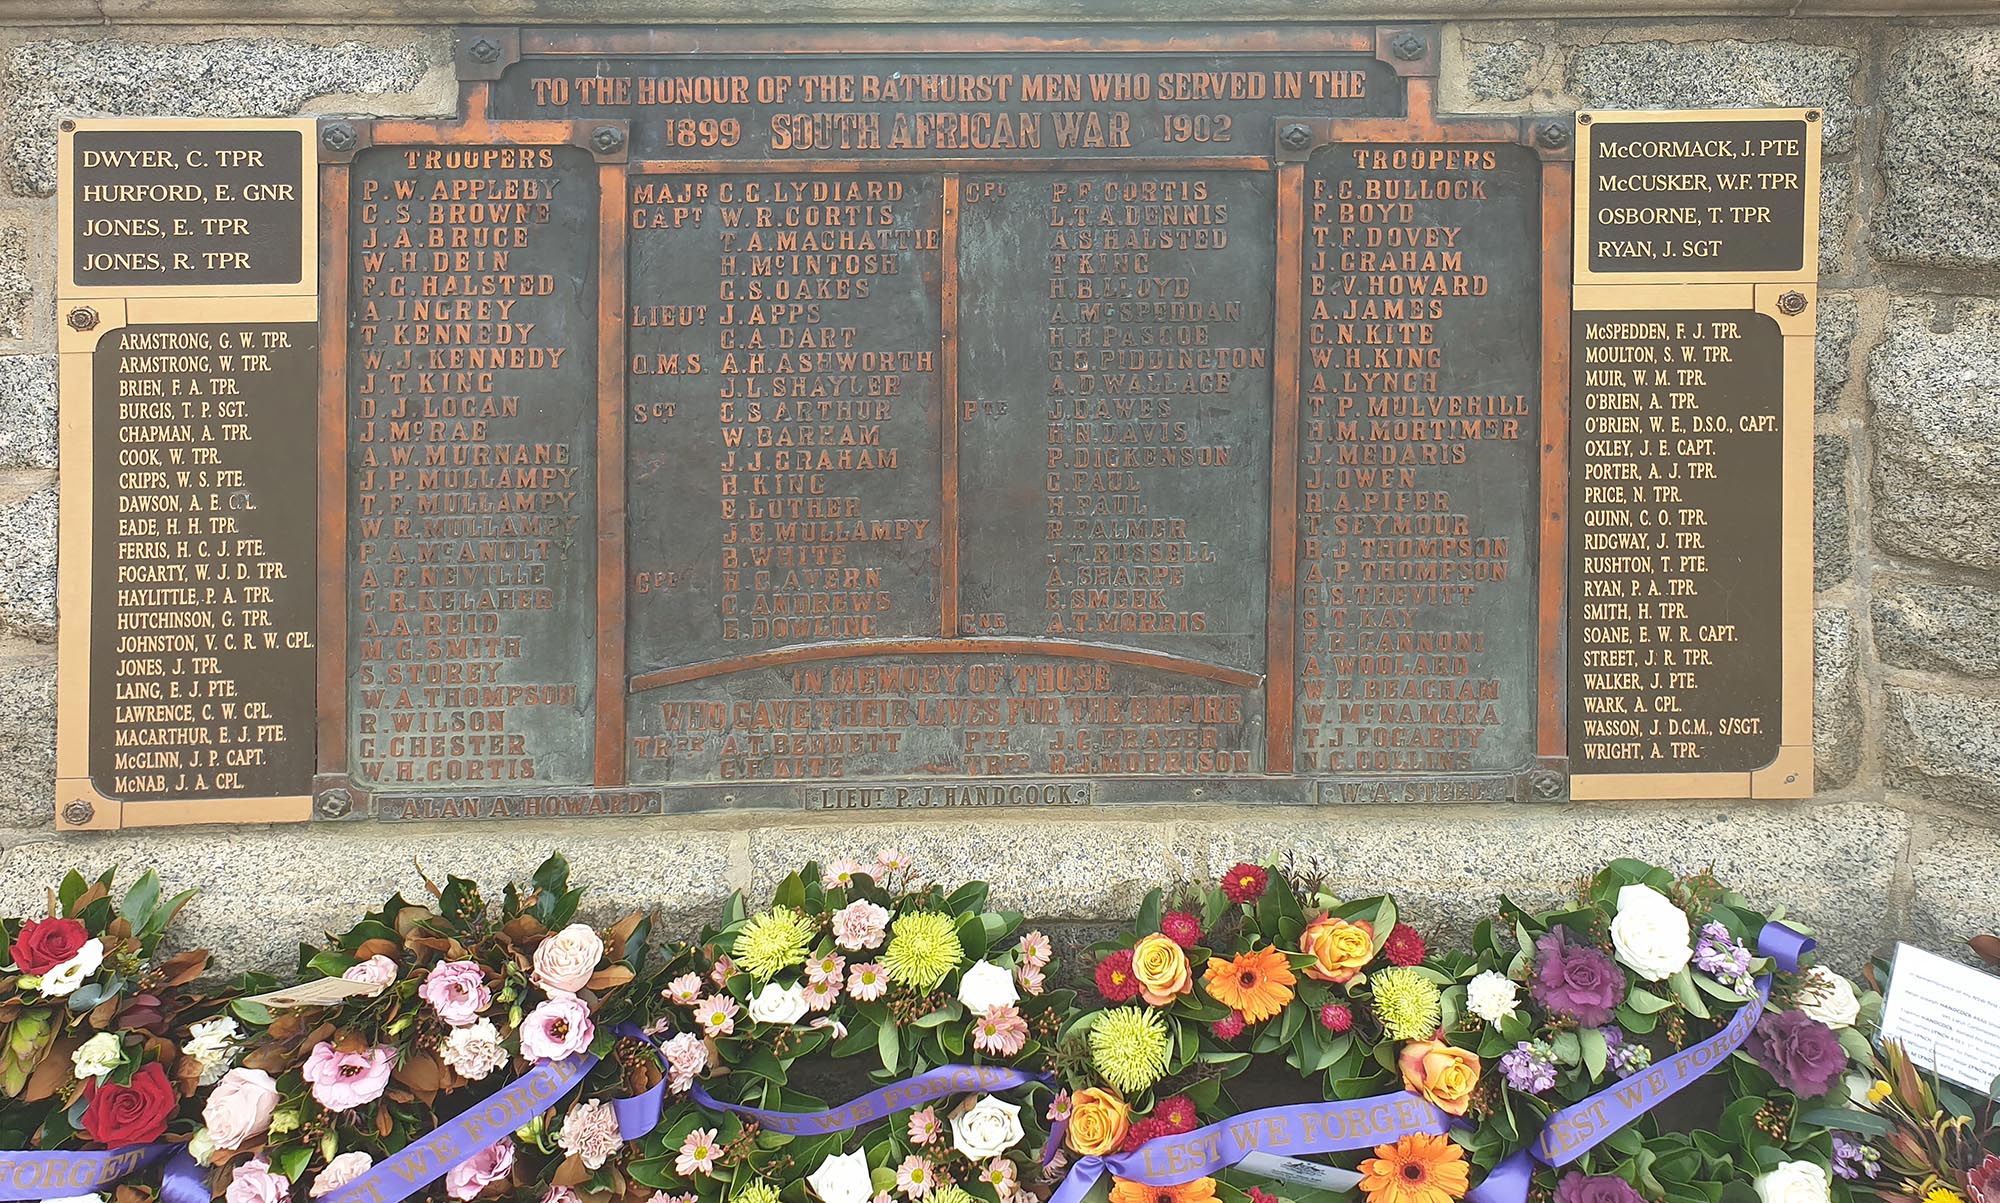 The Bathurst Boer War Memorial dedication plaque featuring the names of local men who served in the Boer War – including Lieutenant Peter Handcock, whose name was added in 1964 (bottom centre).